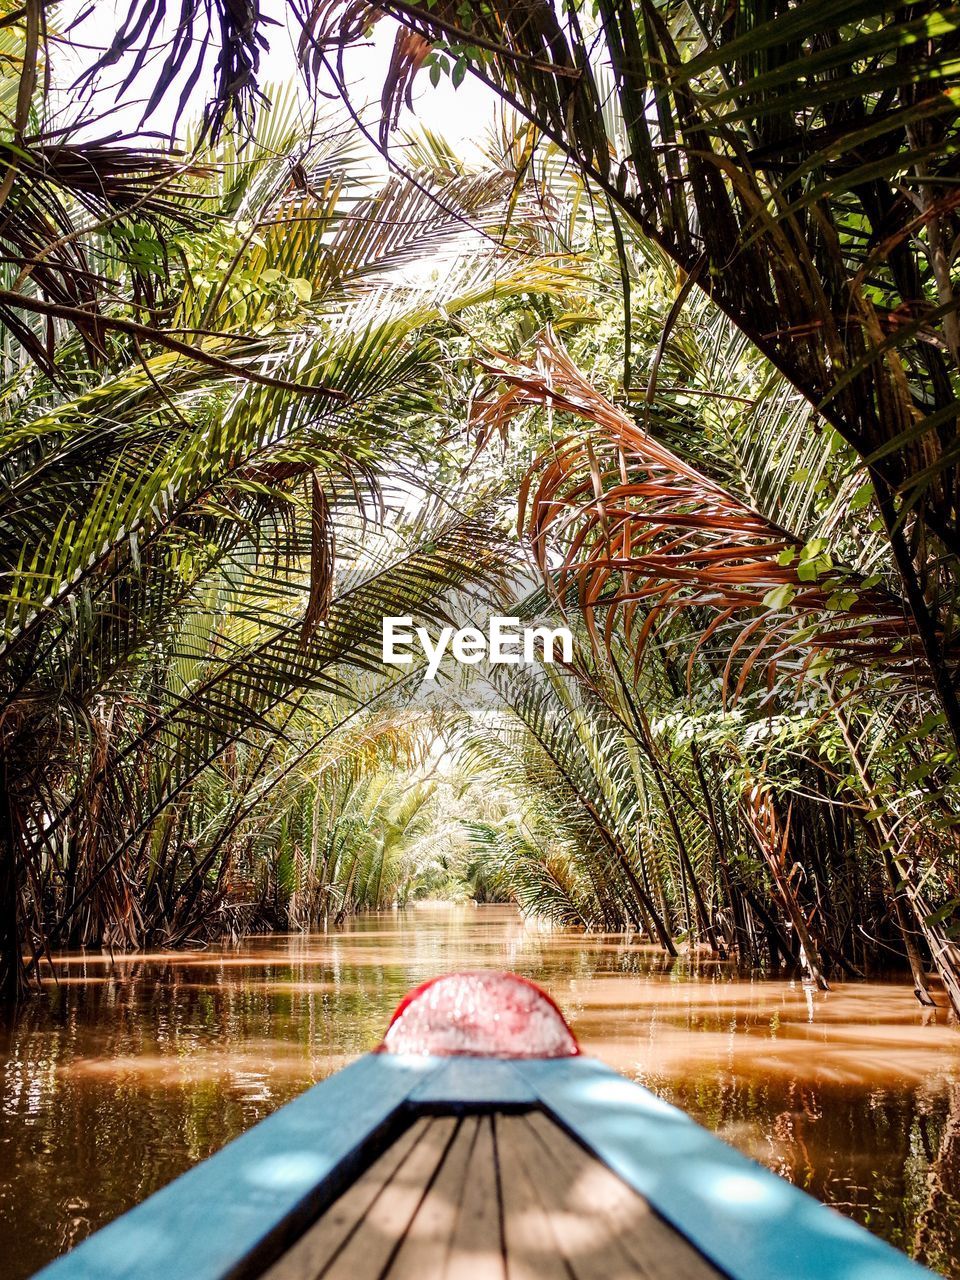 Boat on lake amidst trees in forest